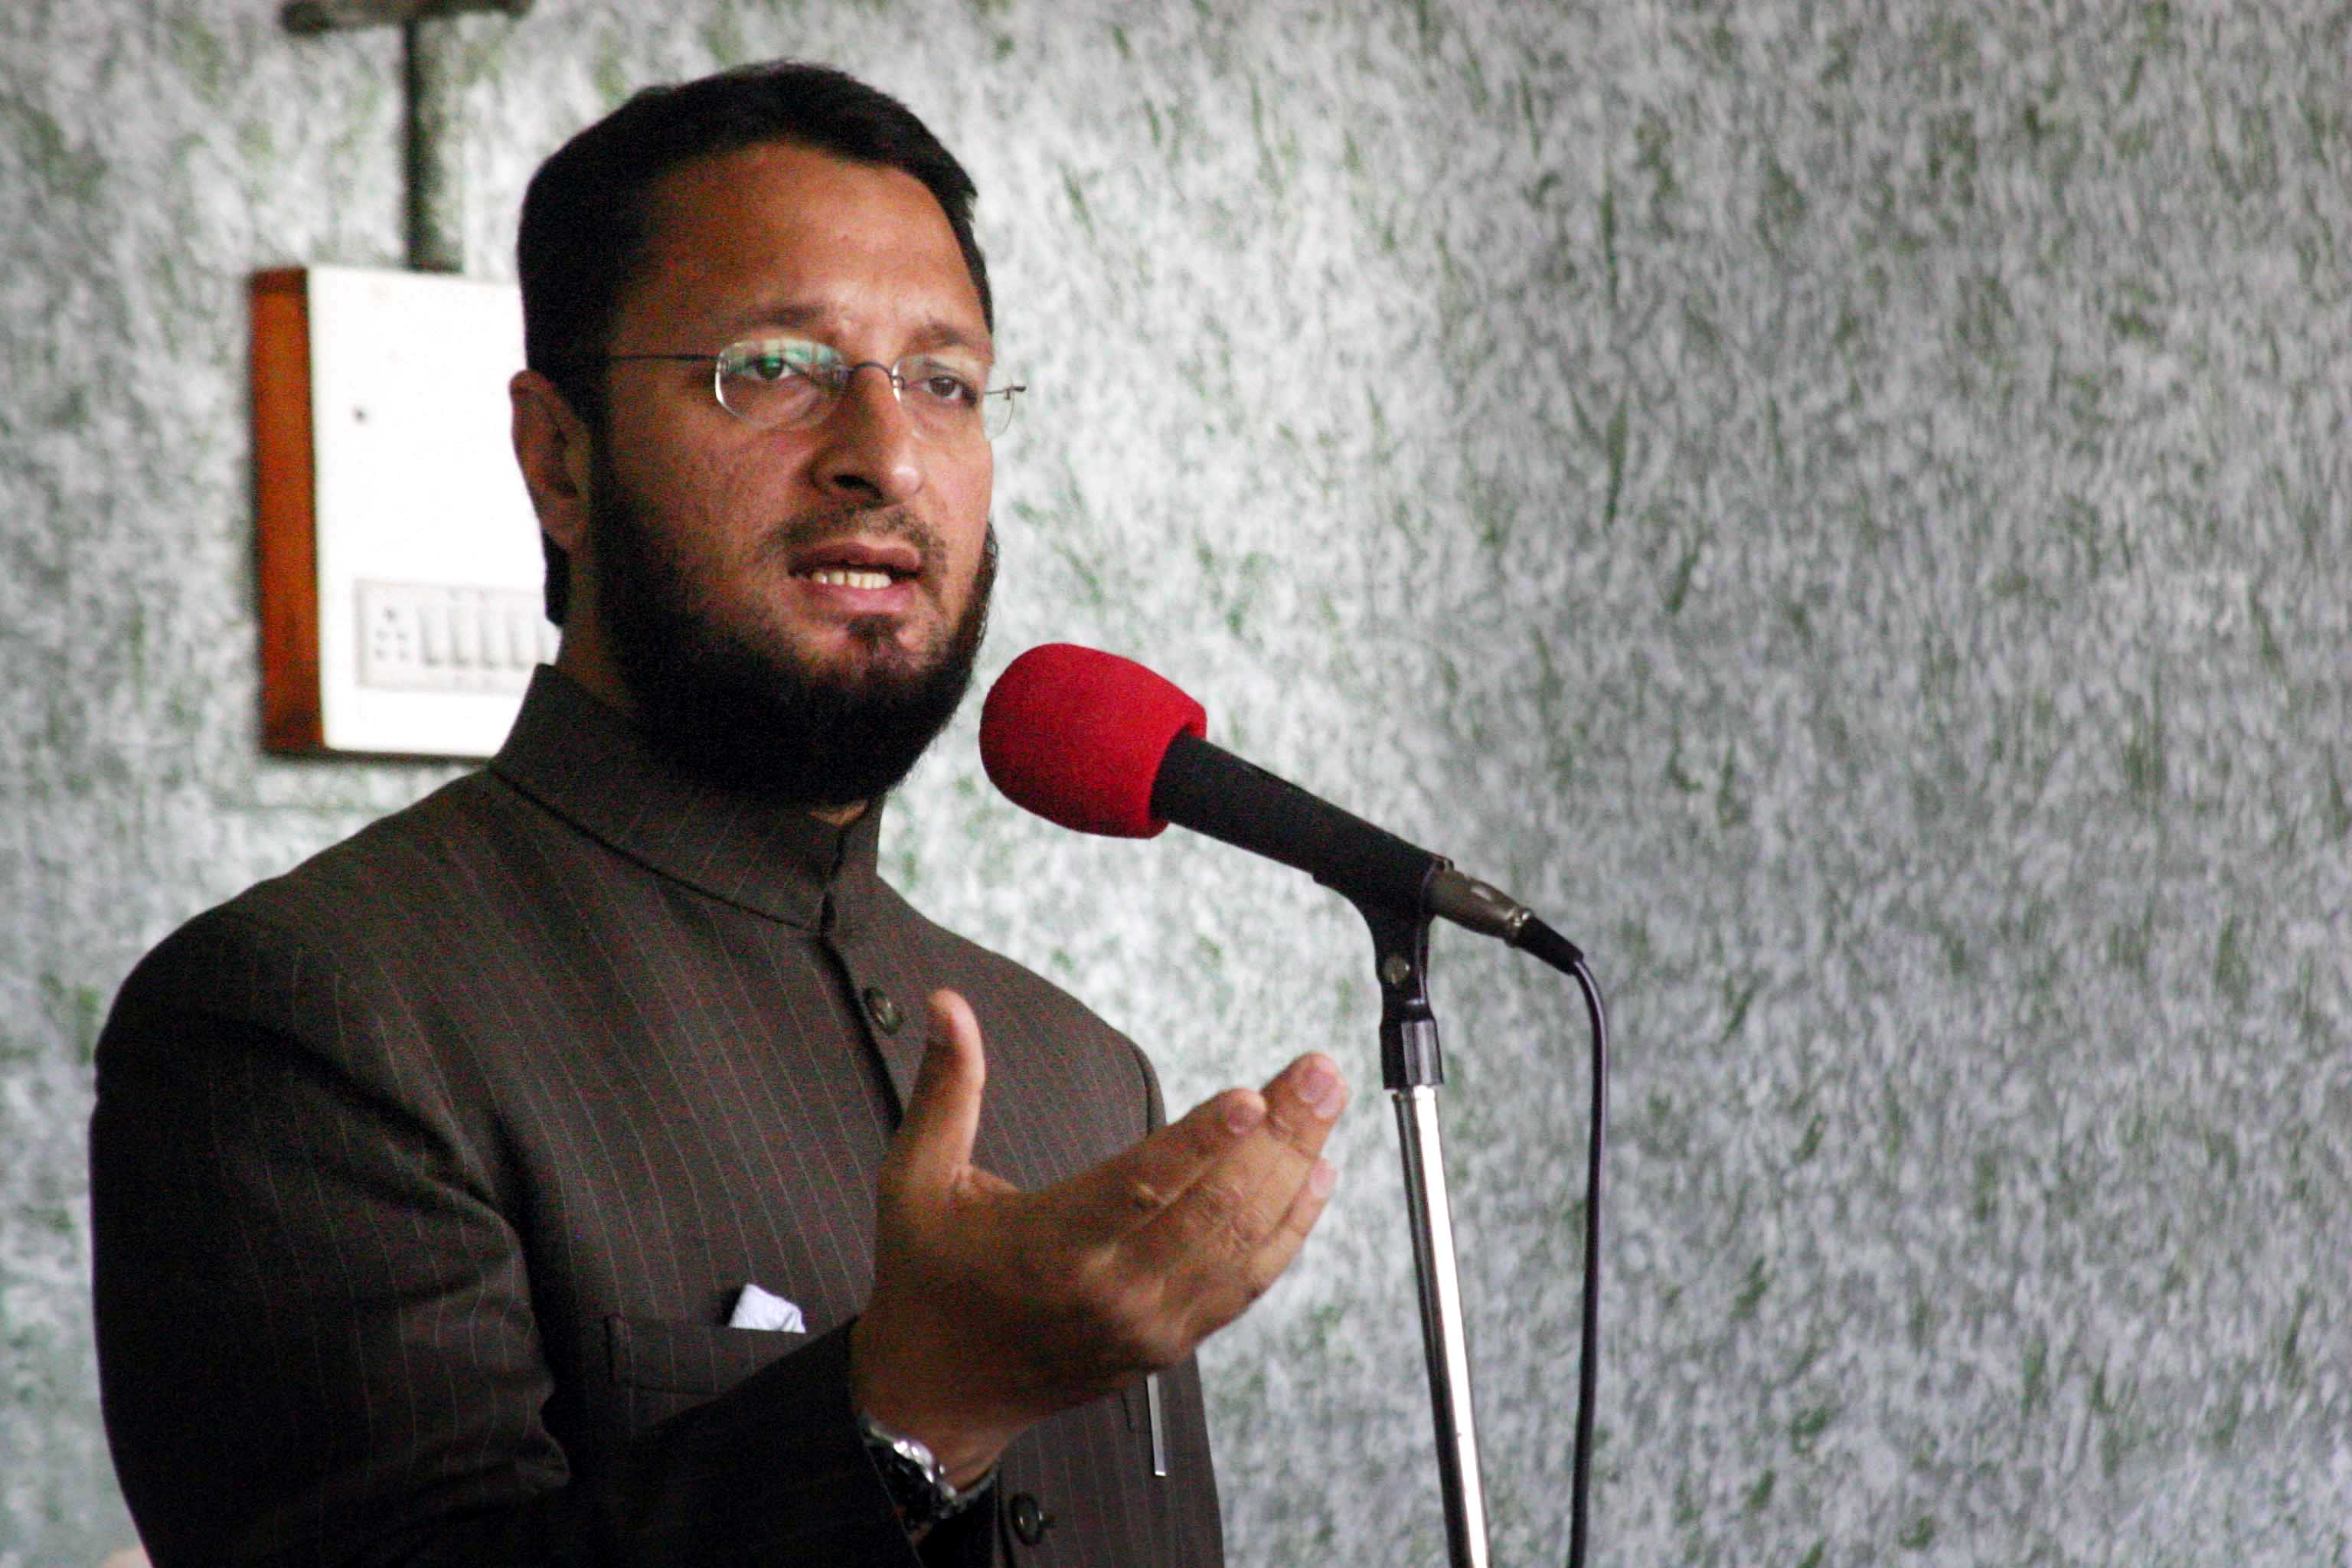 Godse in mind, Gandhi on lips of BJP government, says Owaisi